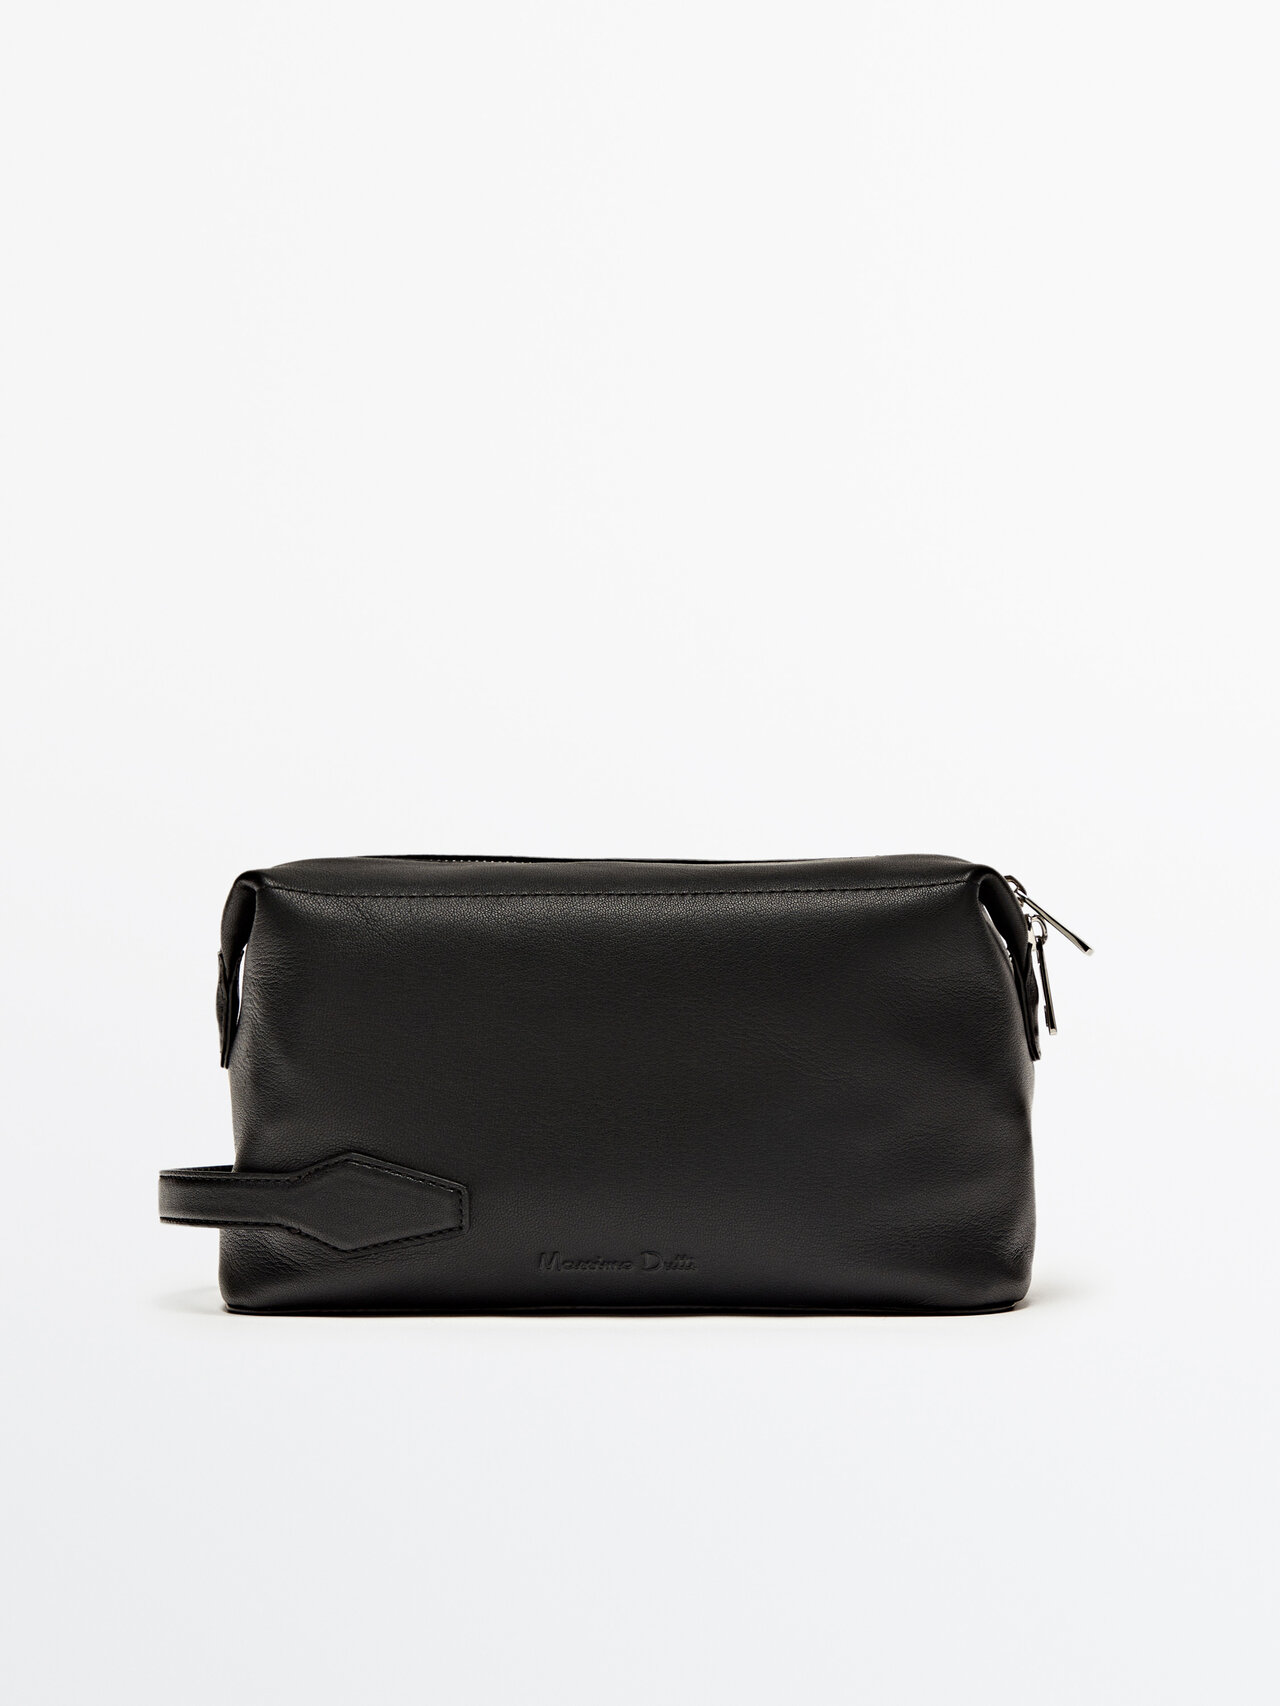 Massimo Dutti Nappa Leather Toiletry Bag With Zip In Black